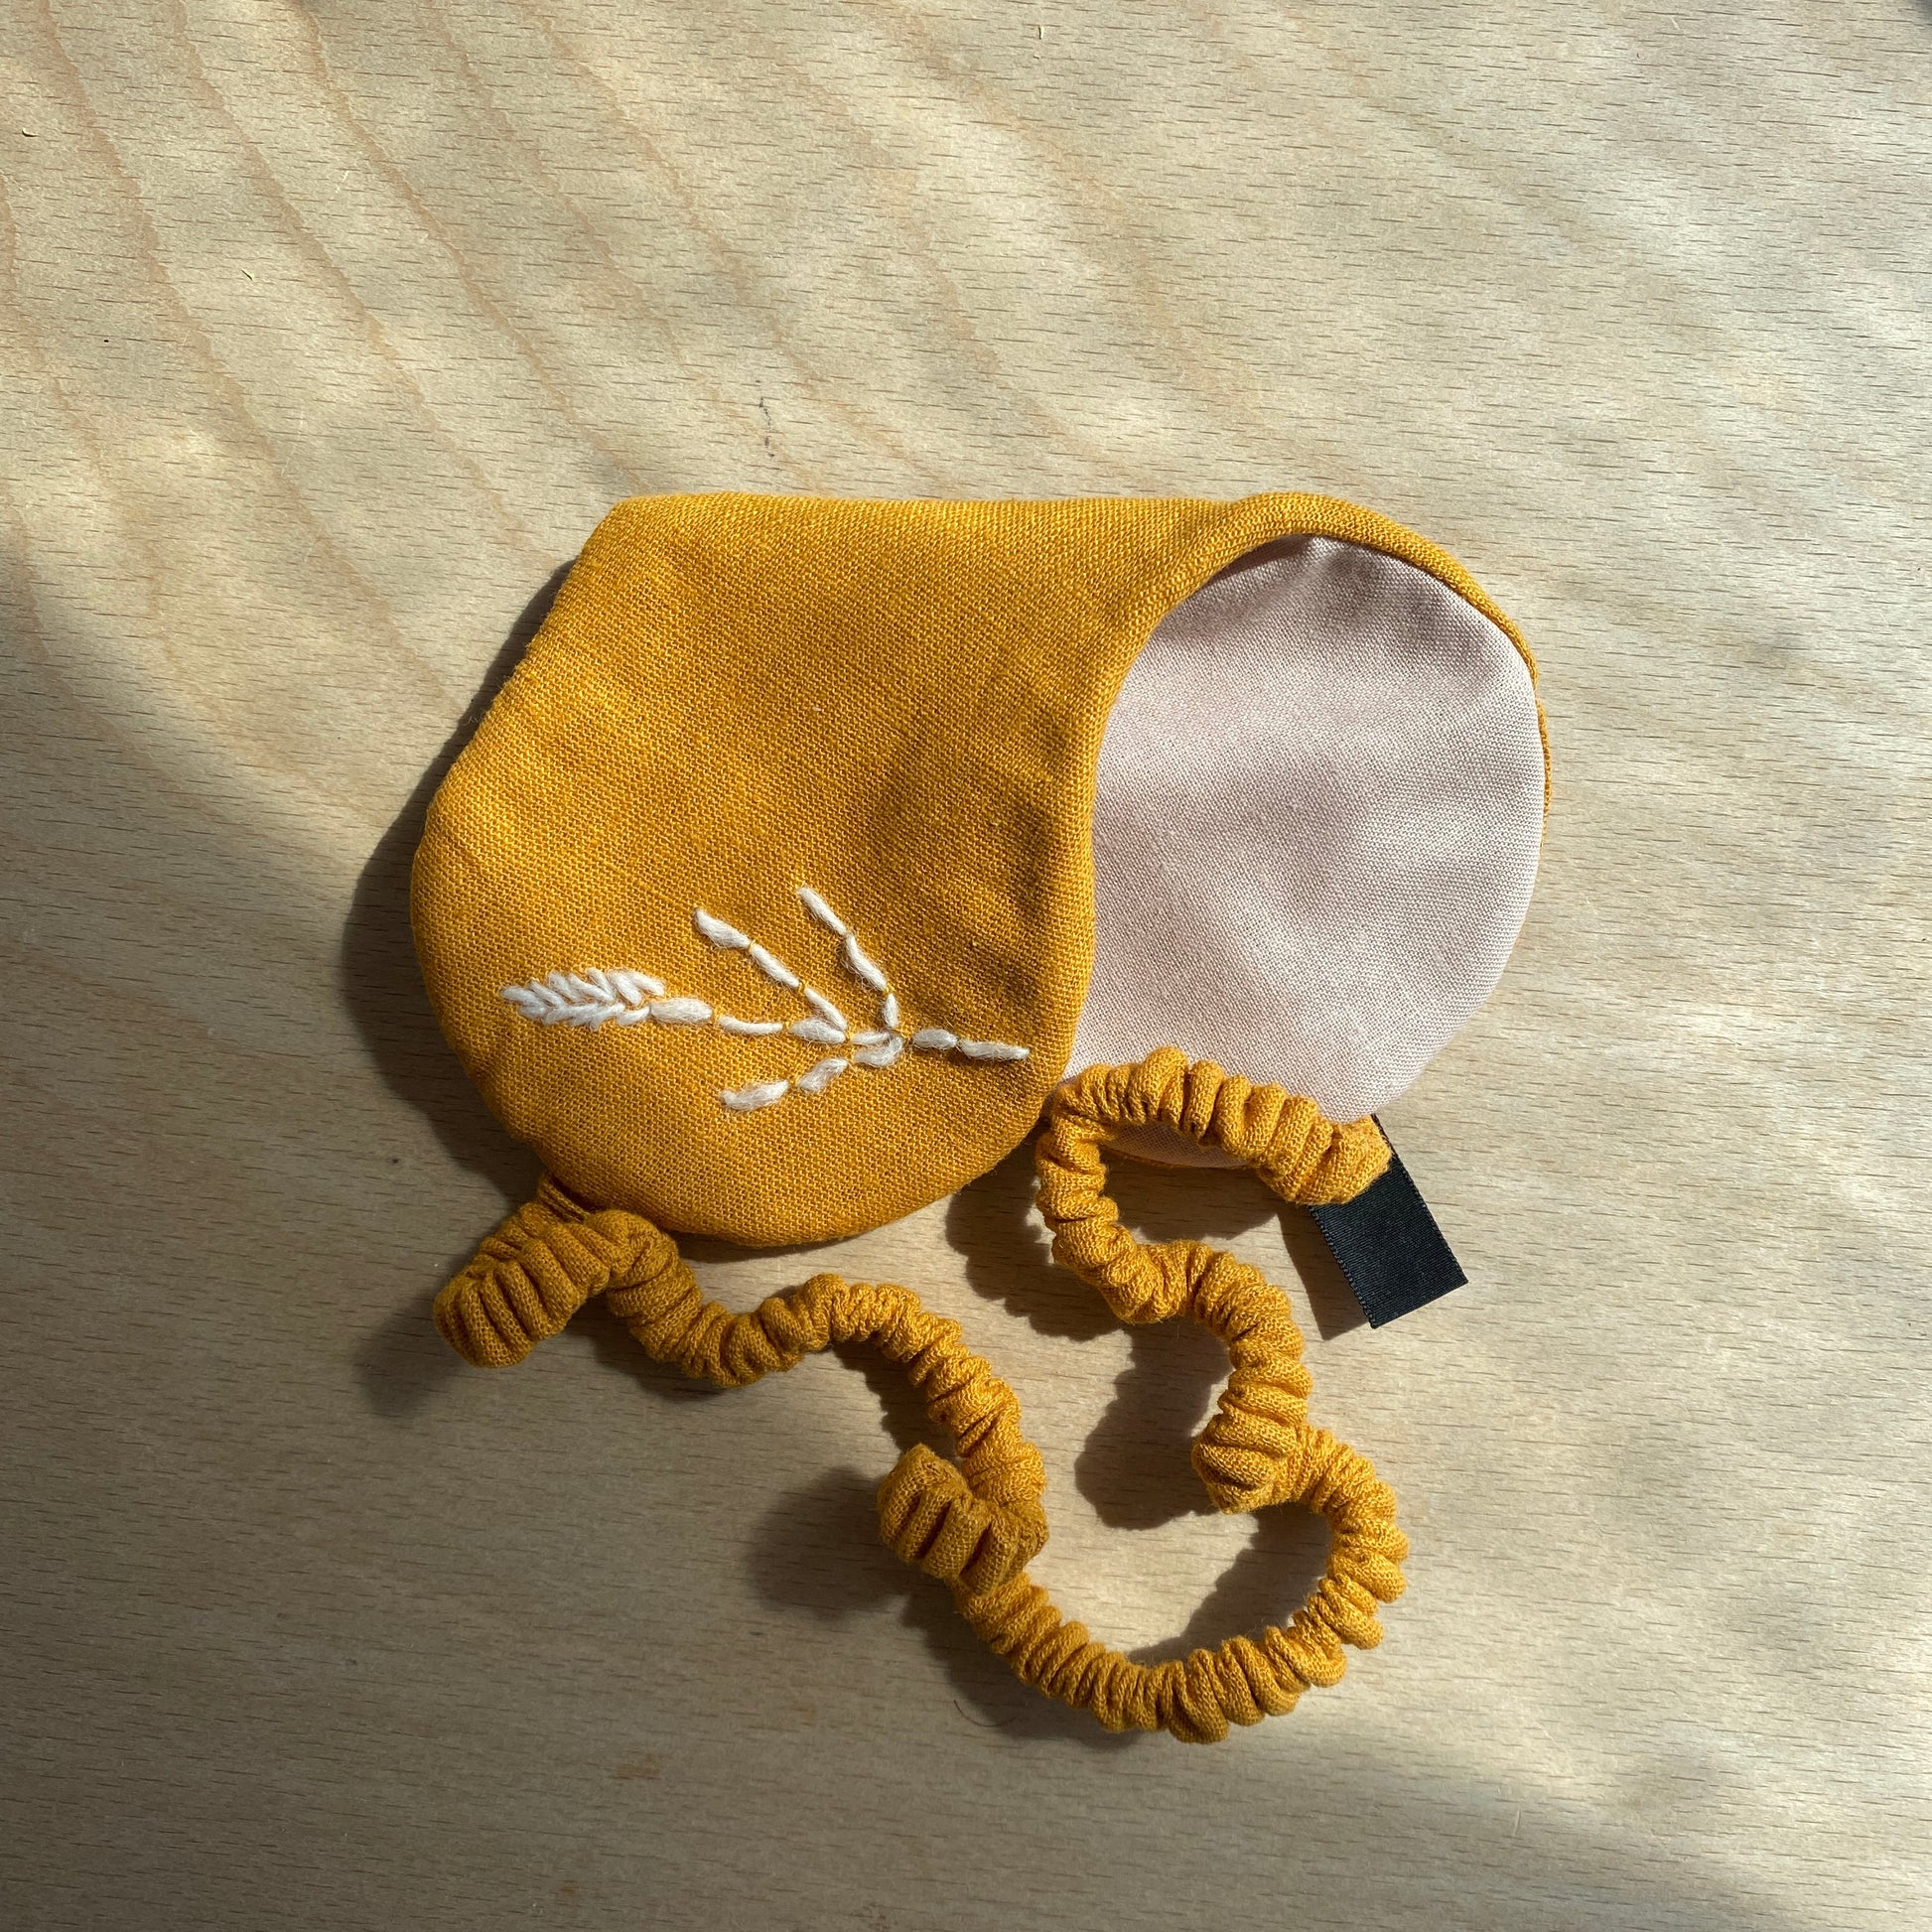 Hand made in East London and Brighton this eye mask is made using ochre linen and is finished with a hand embroidery.